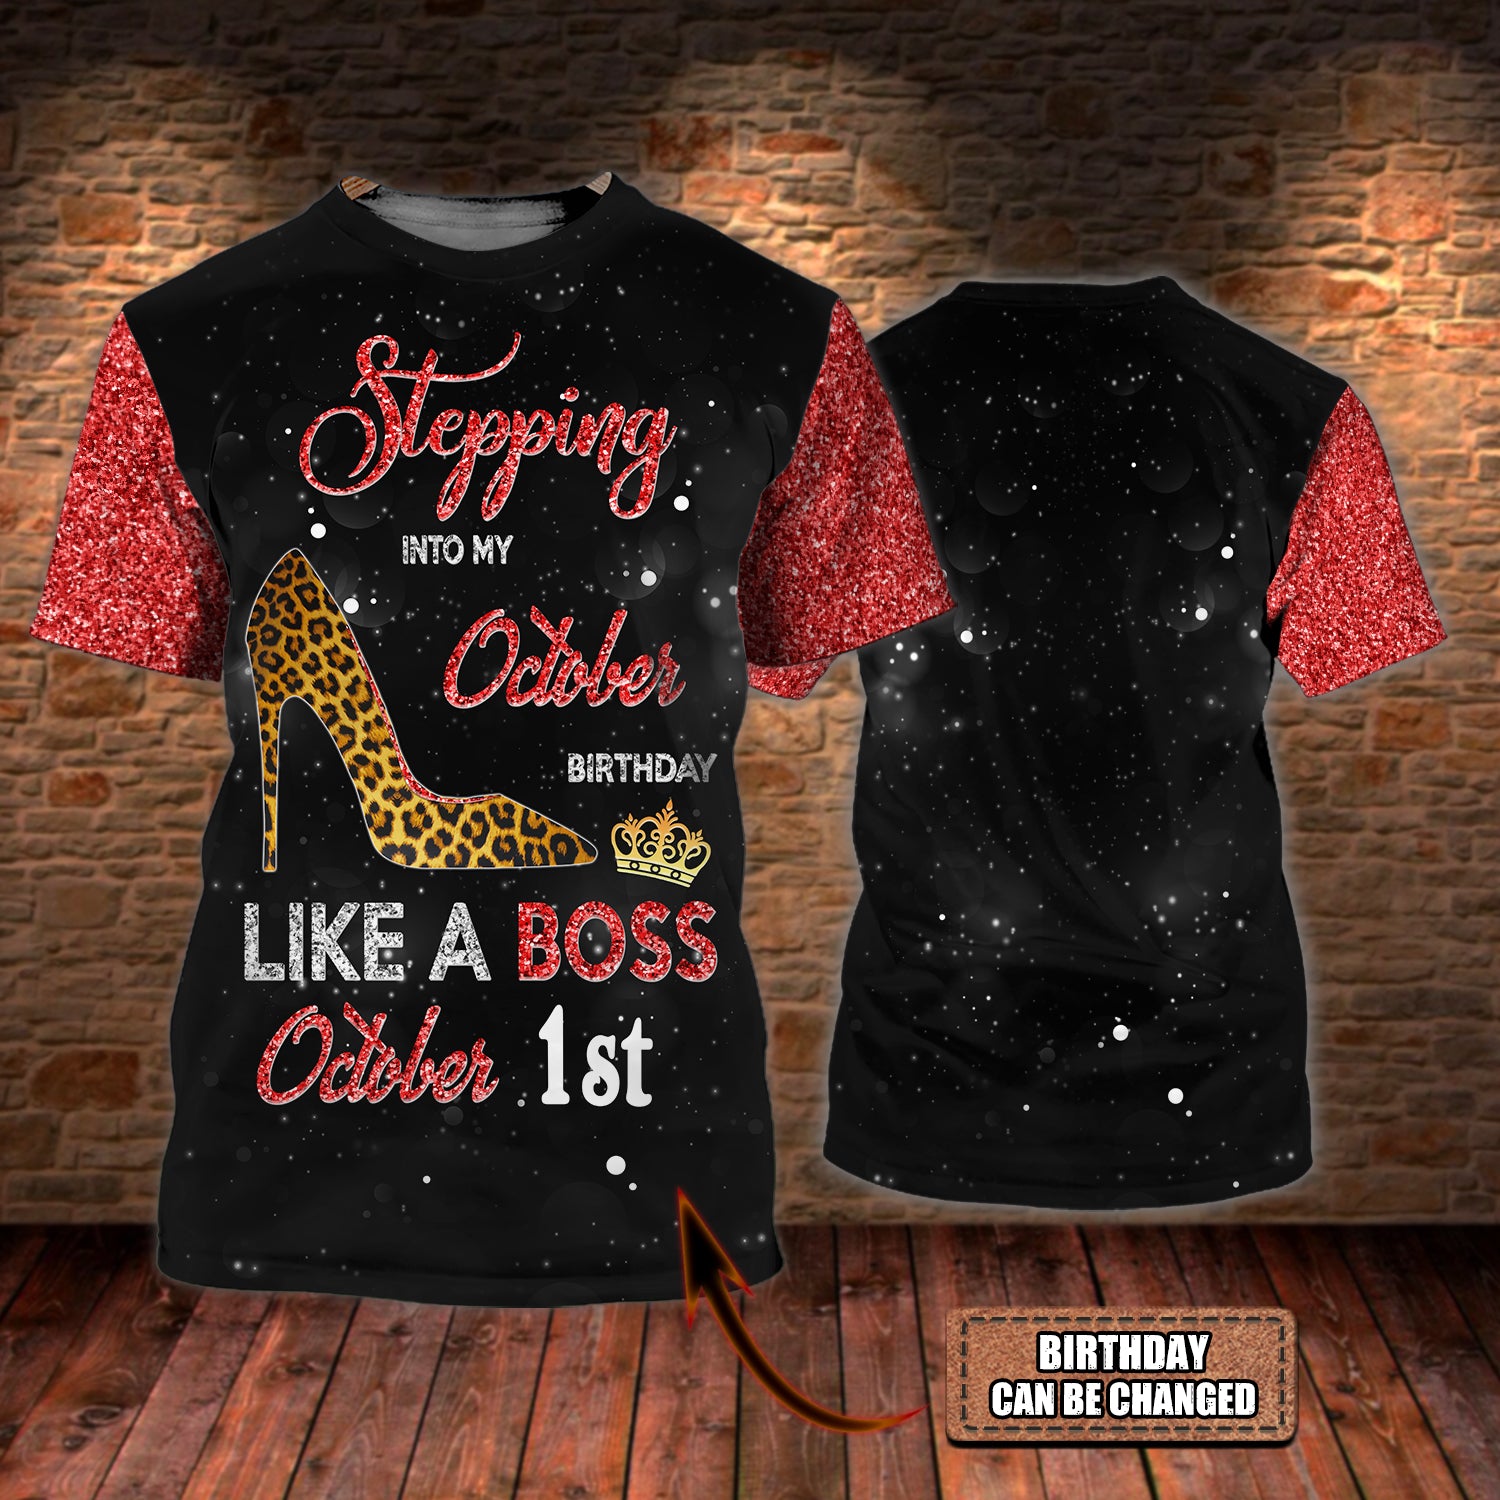 Stepping Into My October Birthday Like A Boss - Personalized Name 3D Tshirt - Tad 41